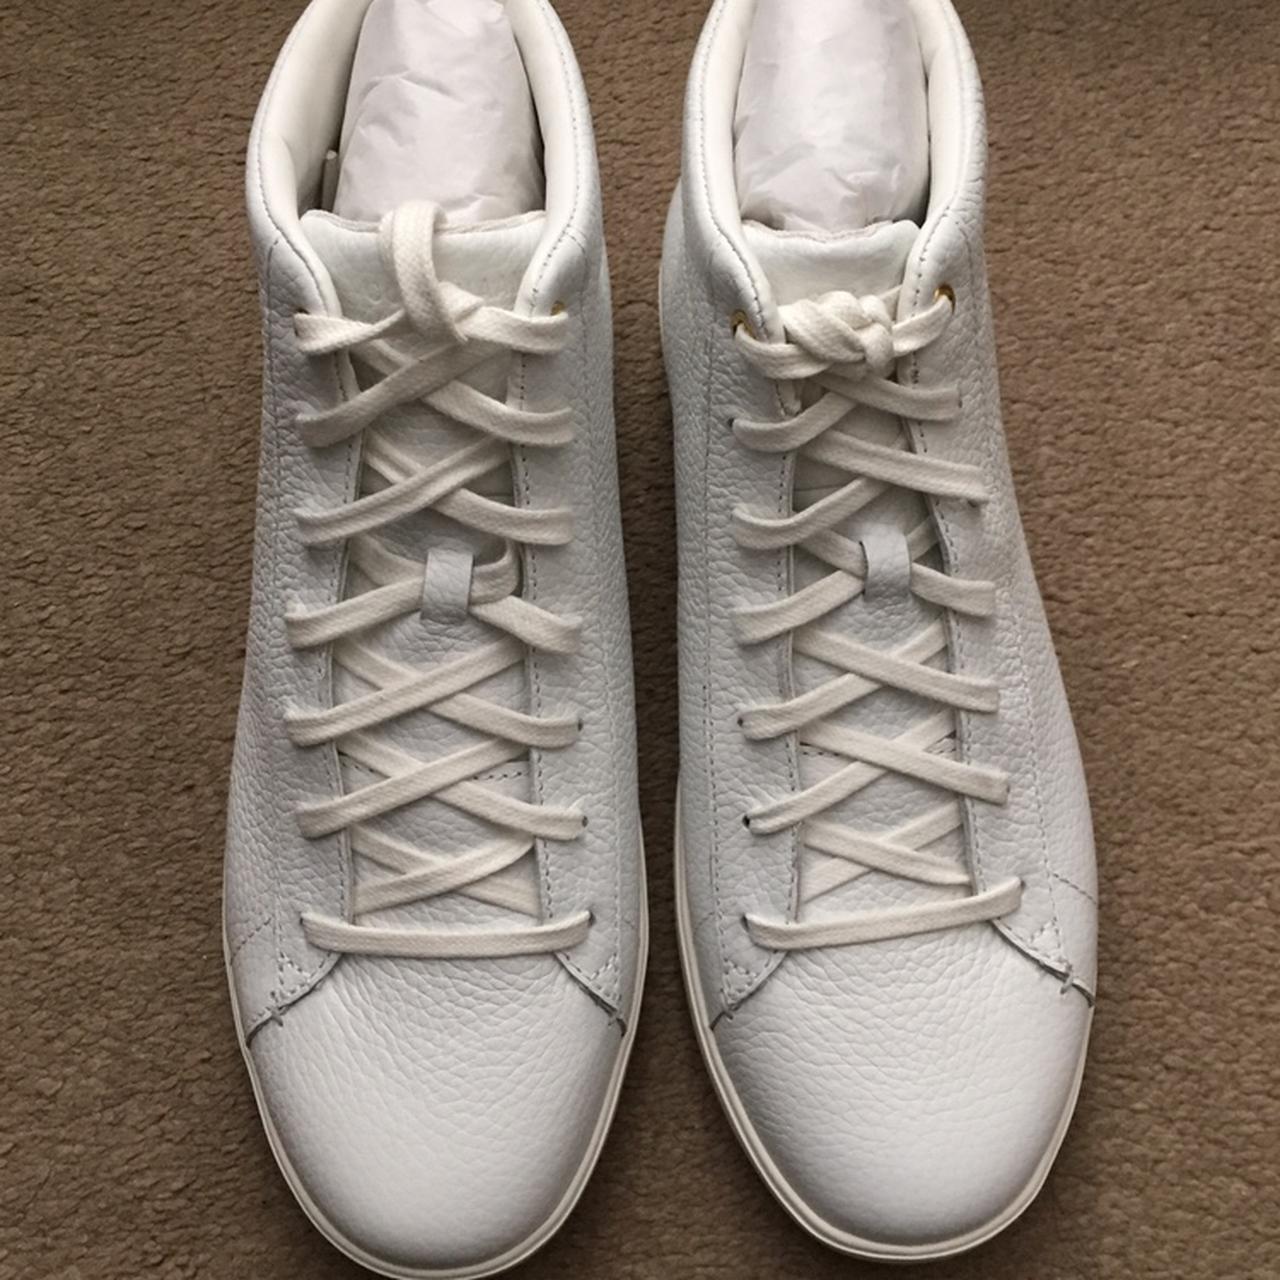 Product Image 2 - Cole Haan white leather high